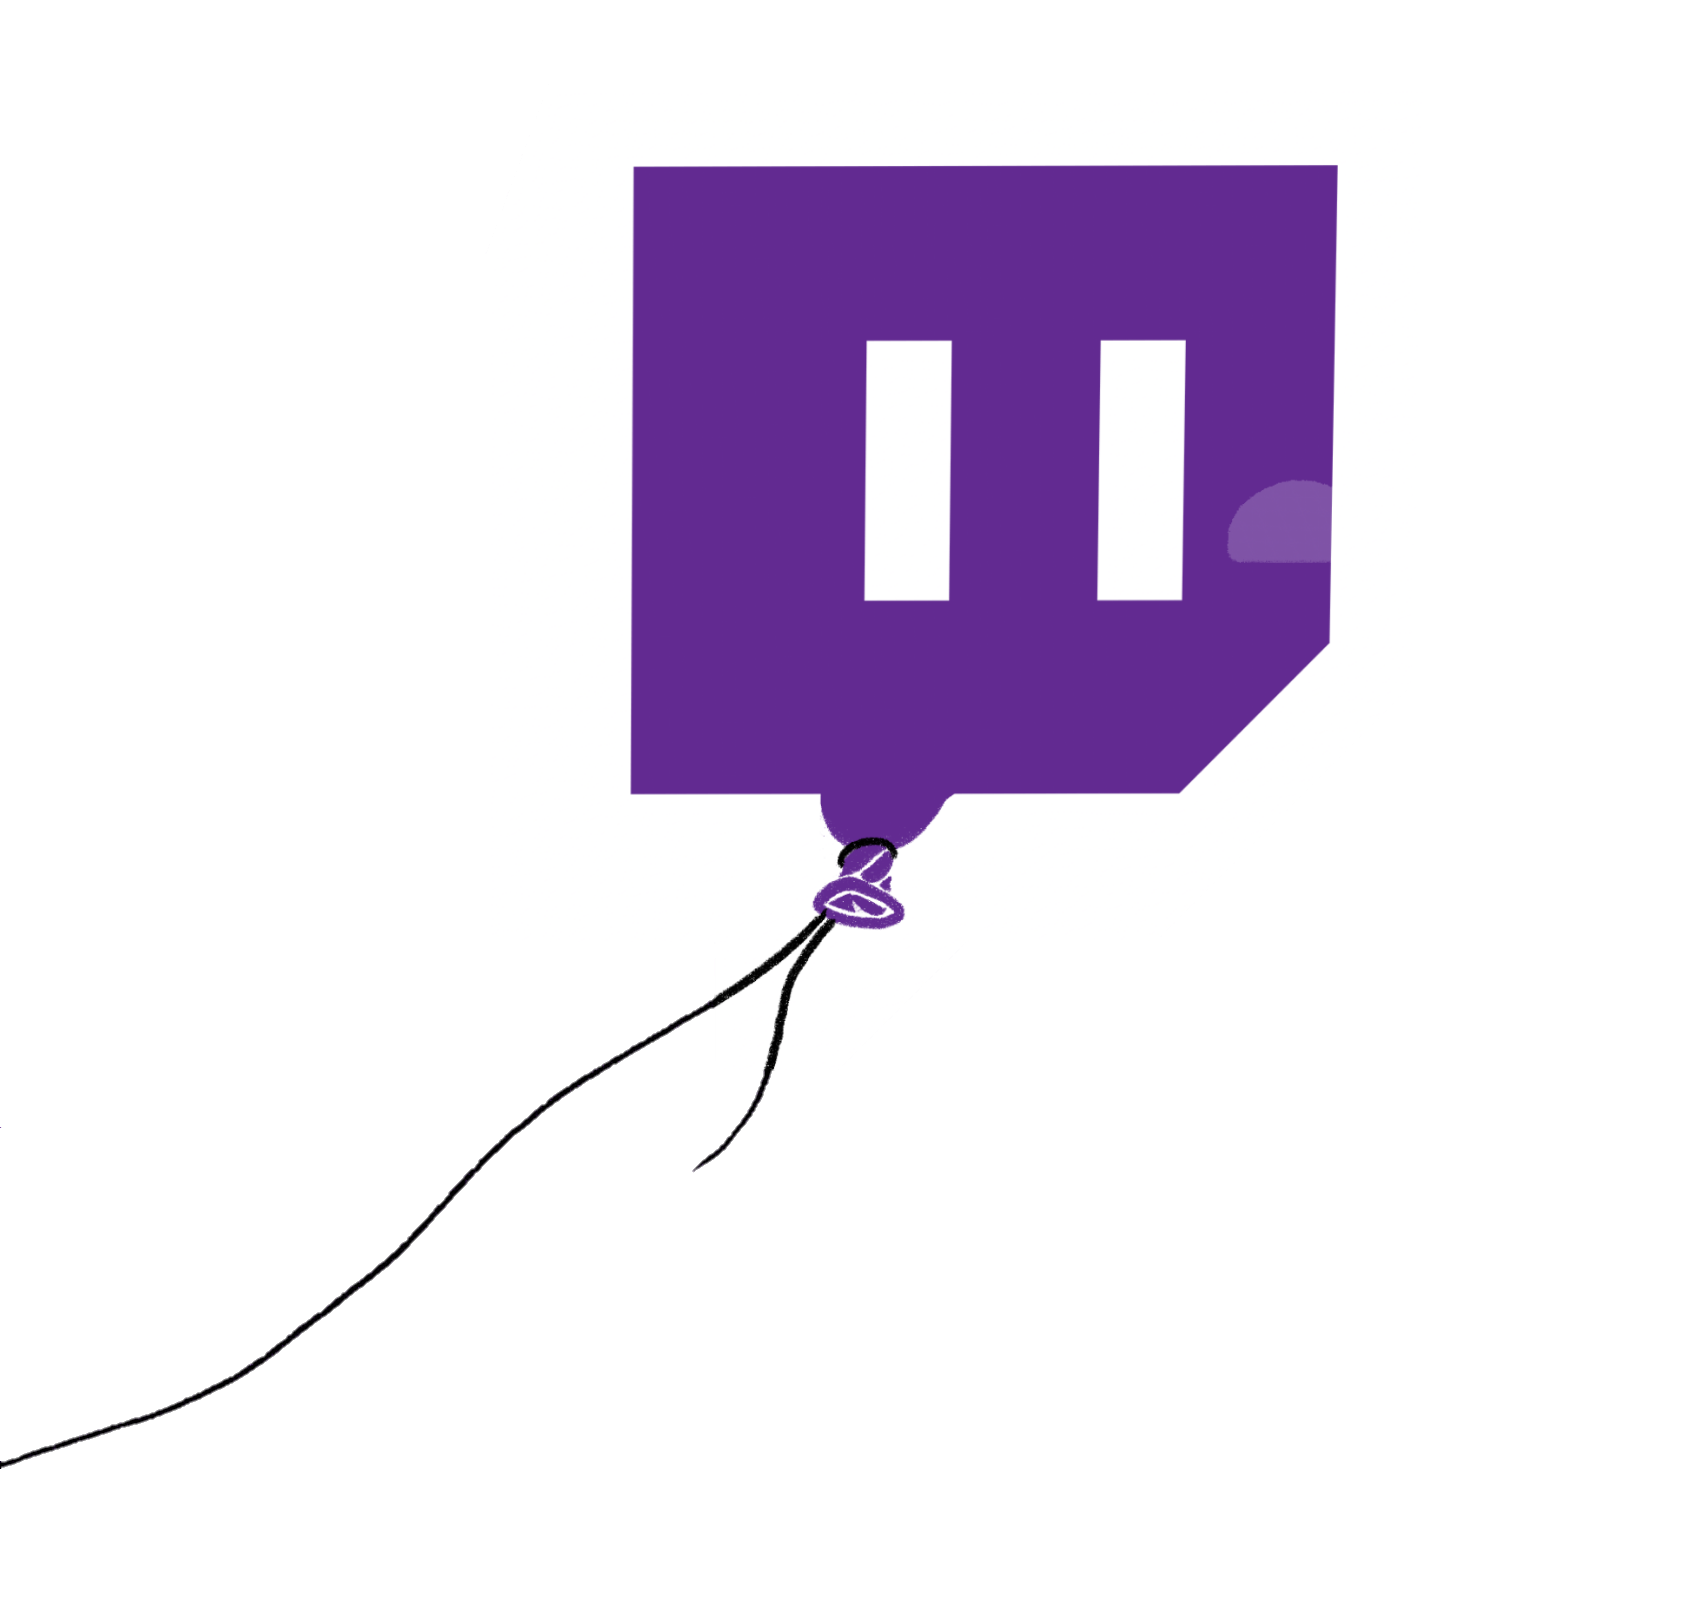 twitch-logo-png-from-pngfre-25